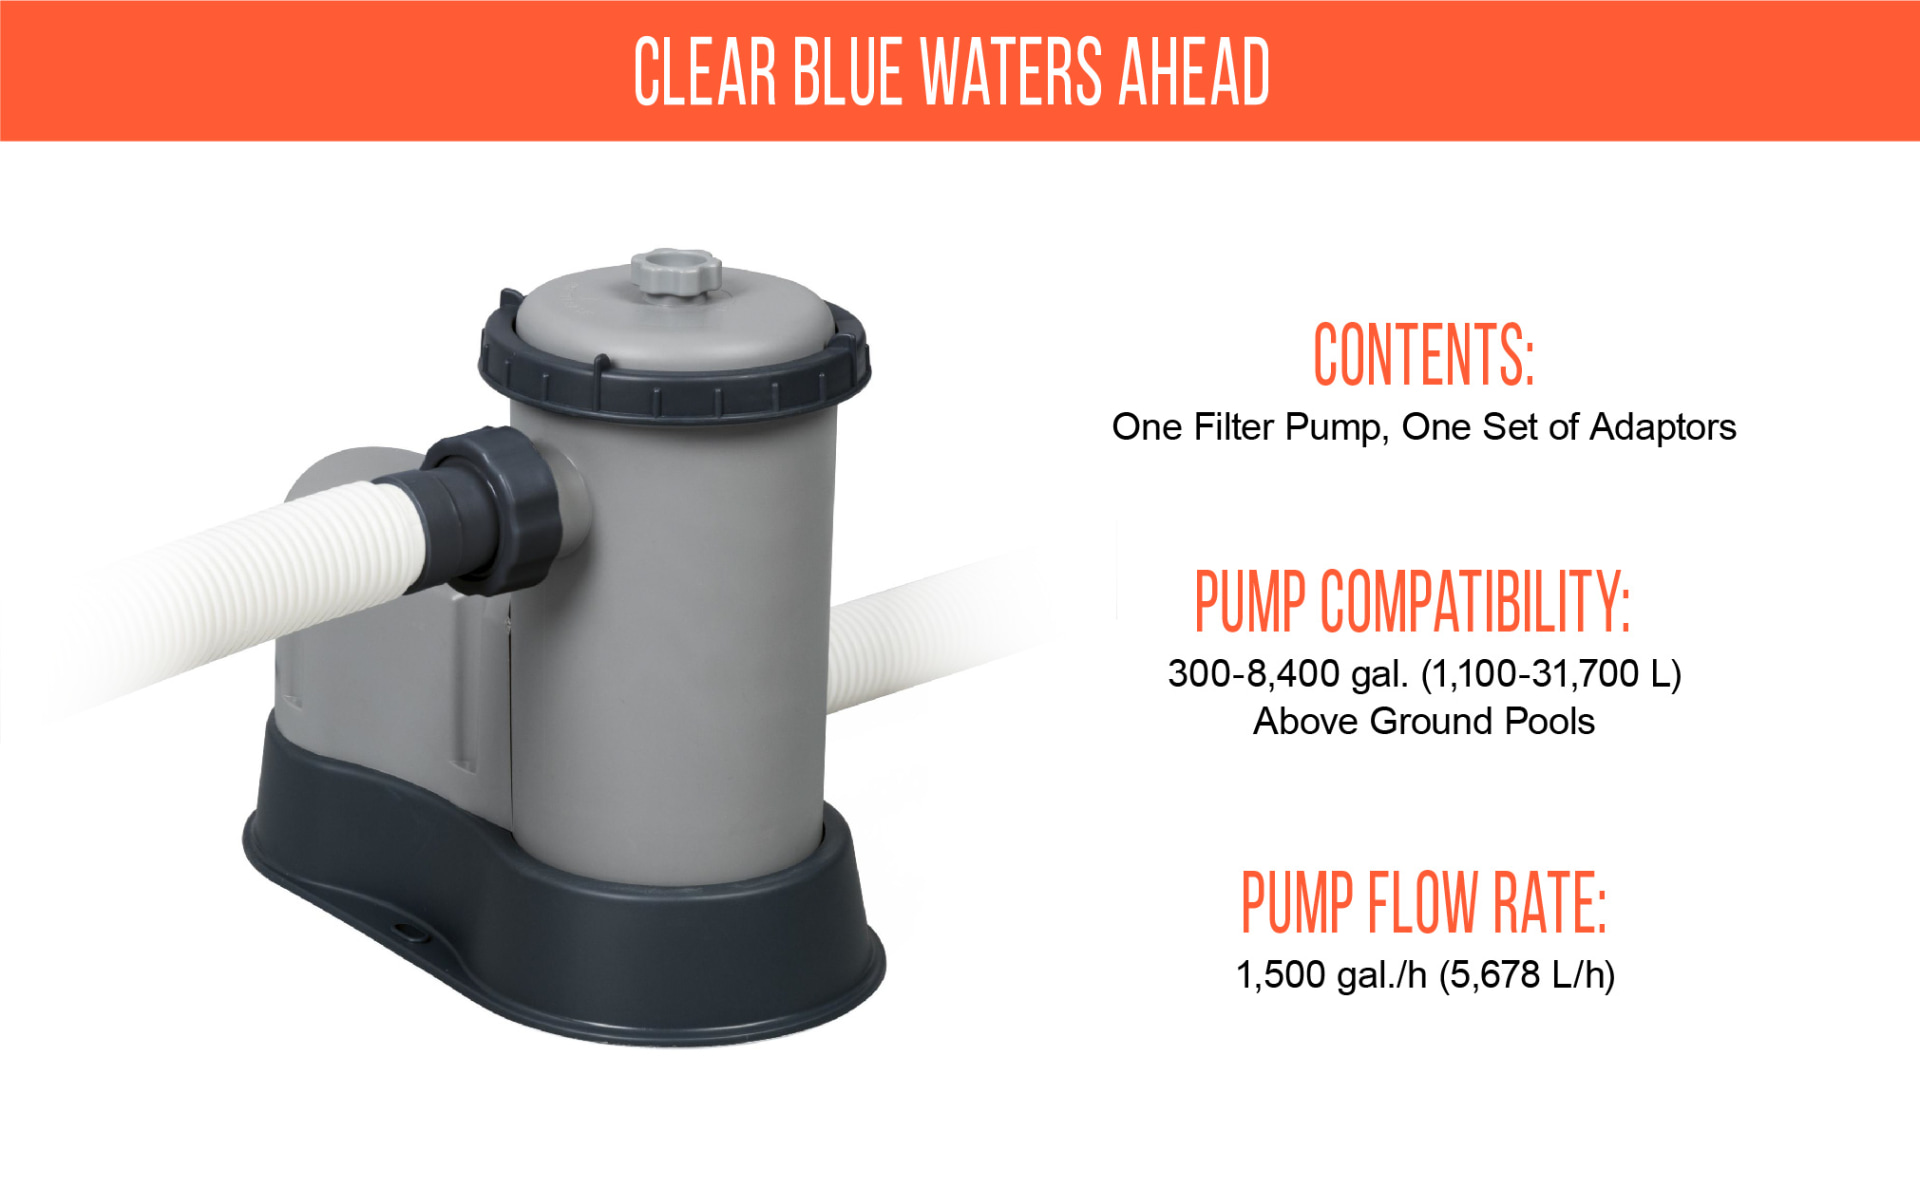 NEW Bestway FlowClear 1500 GPH Filter Pump for Above Ground Swimming ...